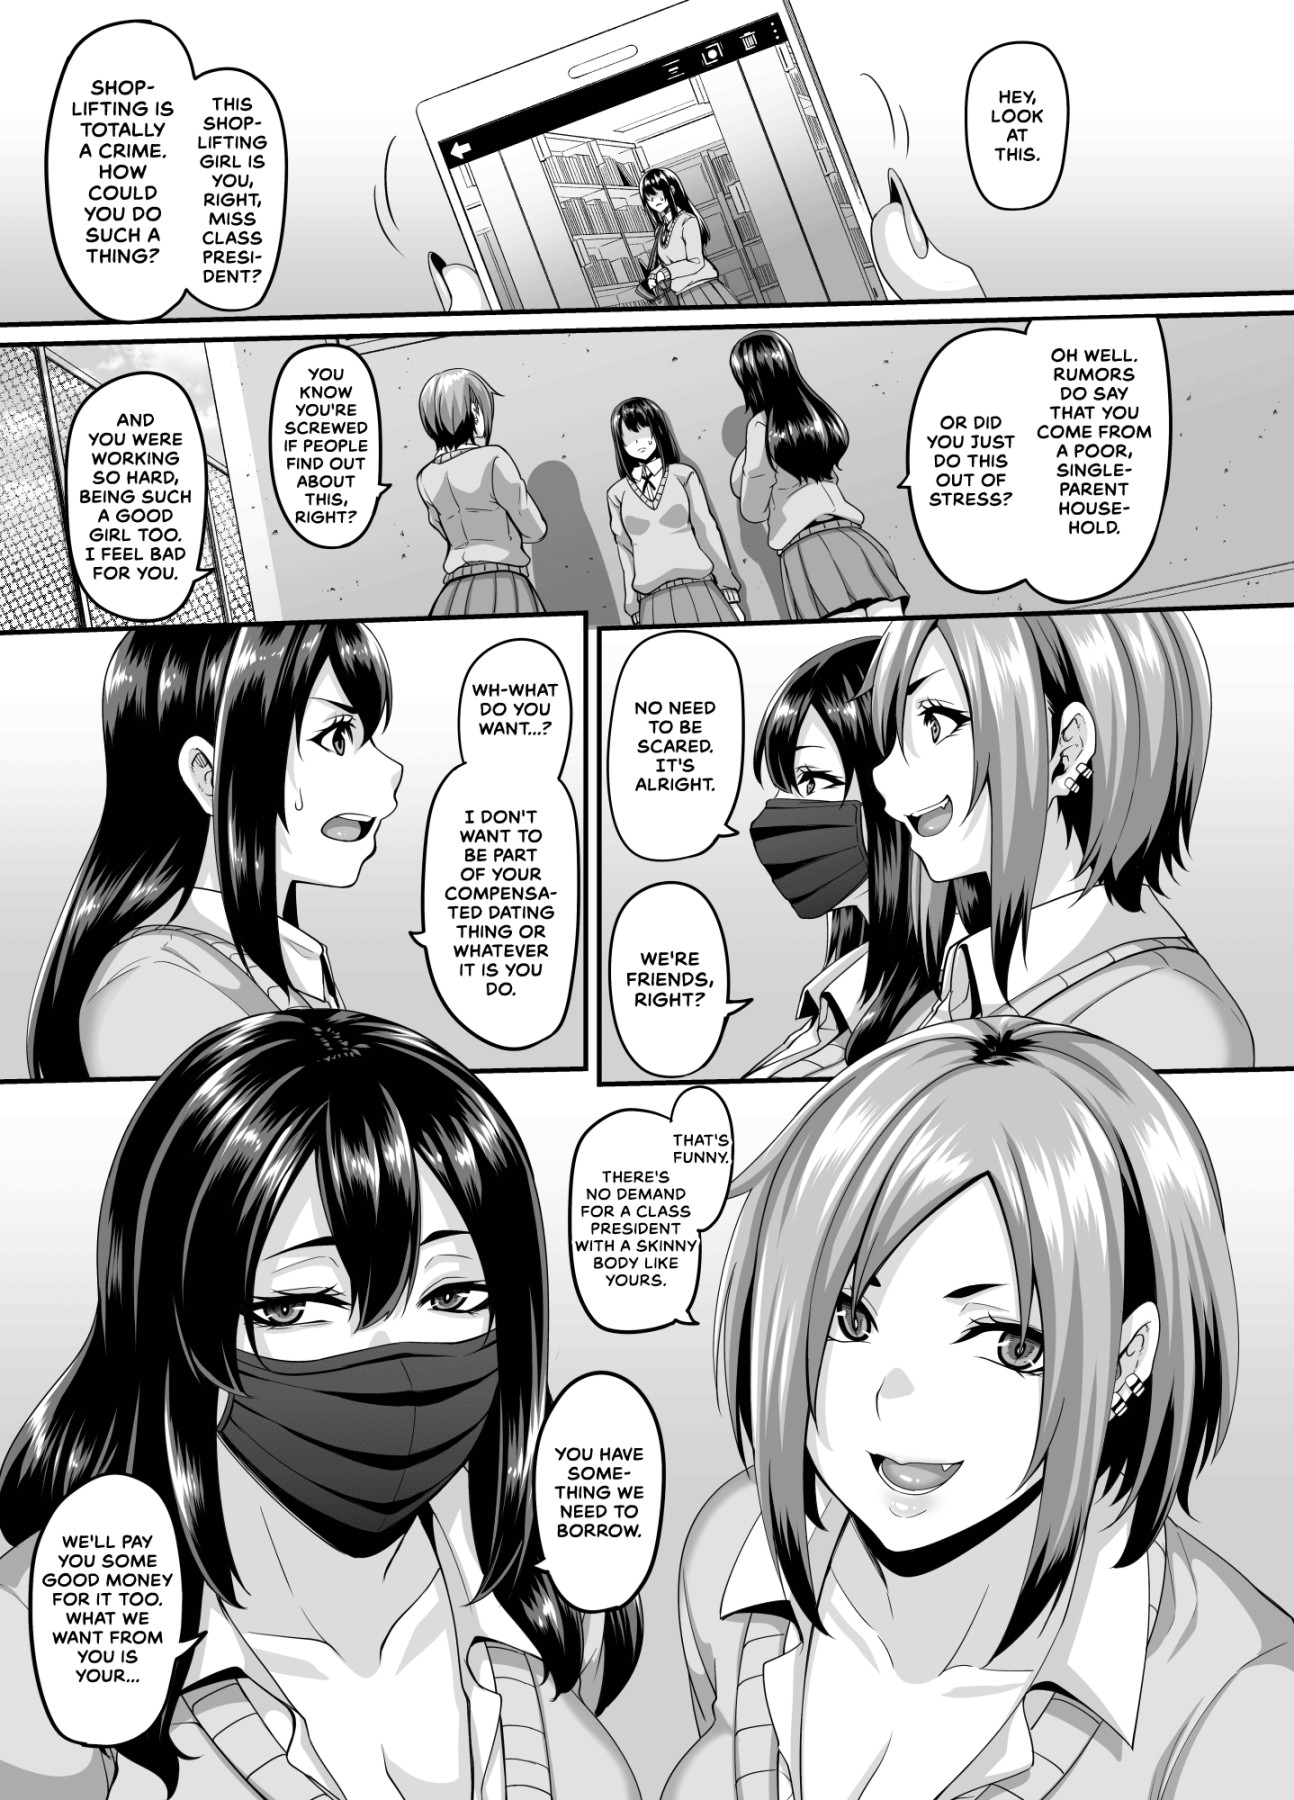 Hentai Manga Comic-We Compensated Dating Sluts Will Buy Your Little Brother So We Can show Him So Love And Turn Him Into a Dry-Orgasming Playboy-Read-3